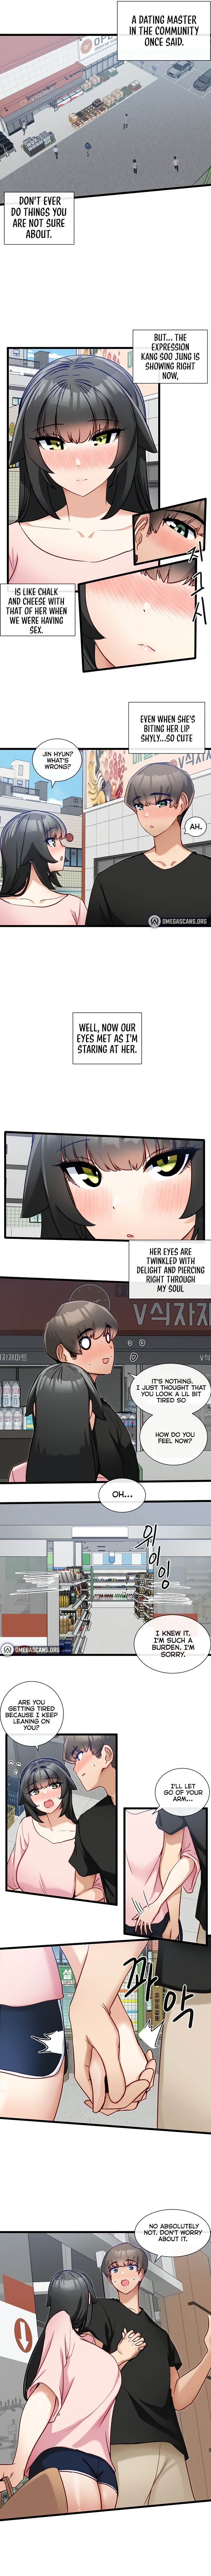 Heroine App - Chapter 14 Page 4